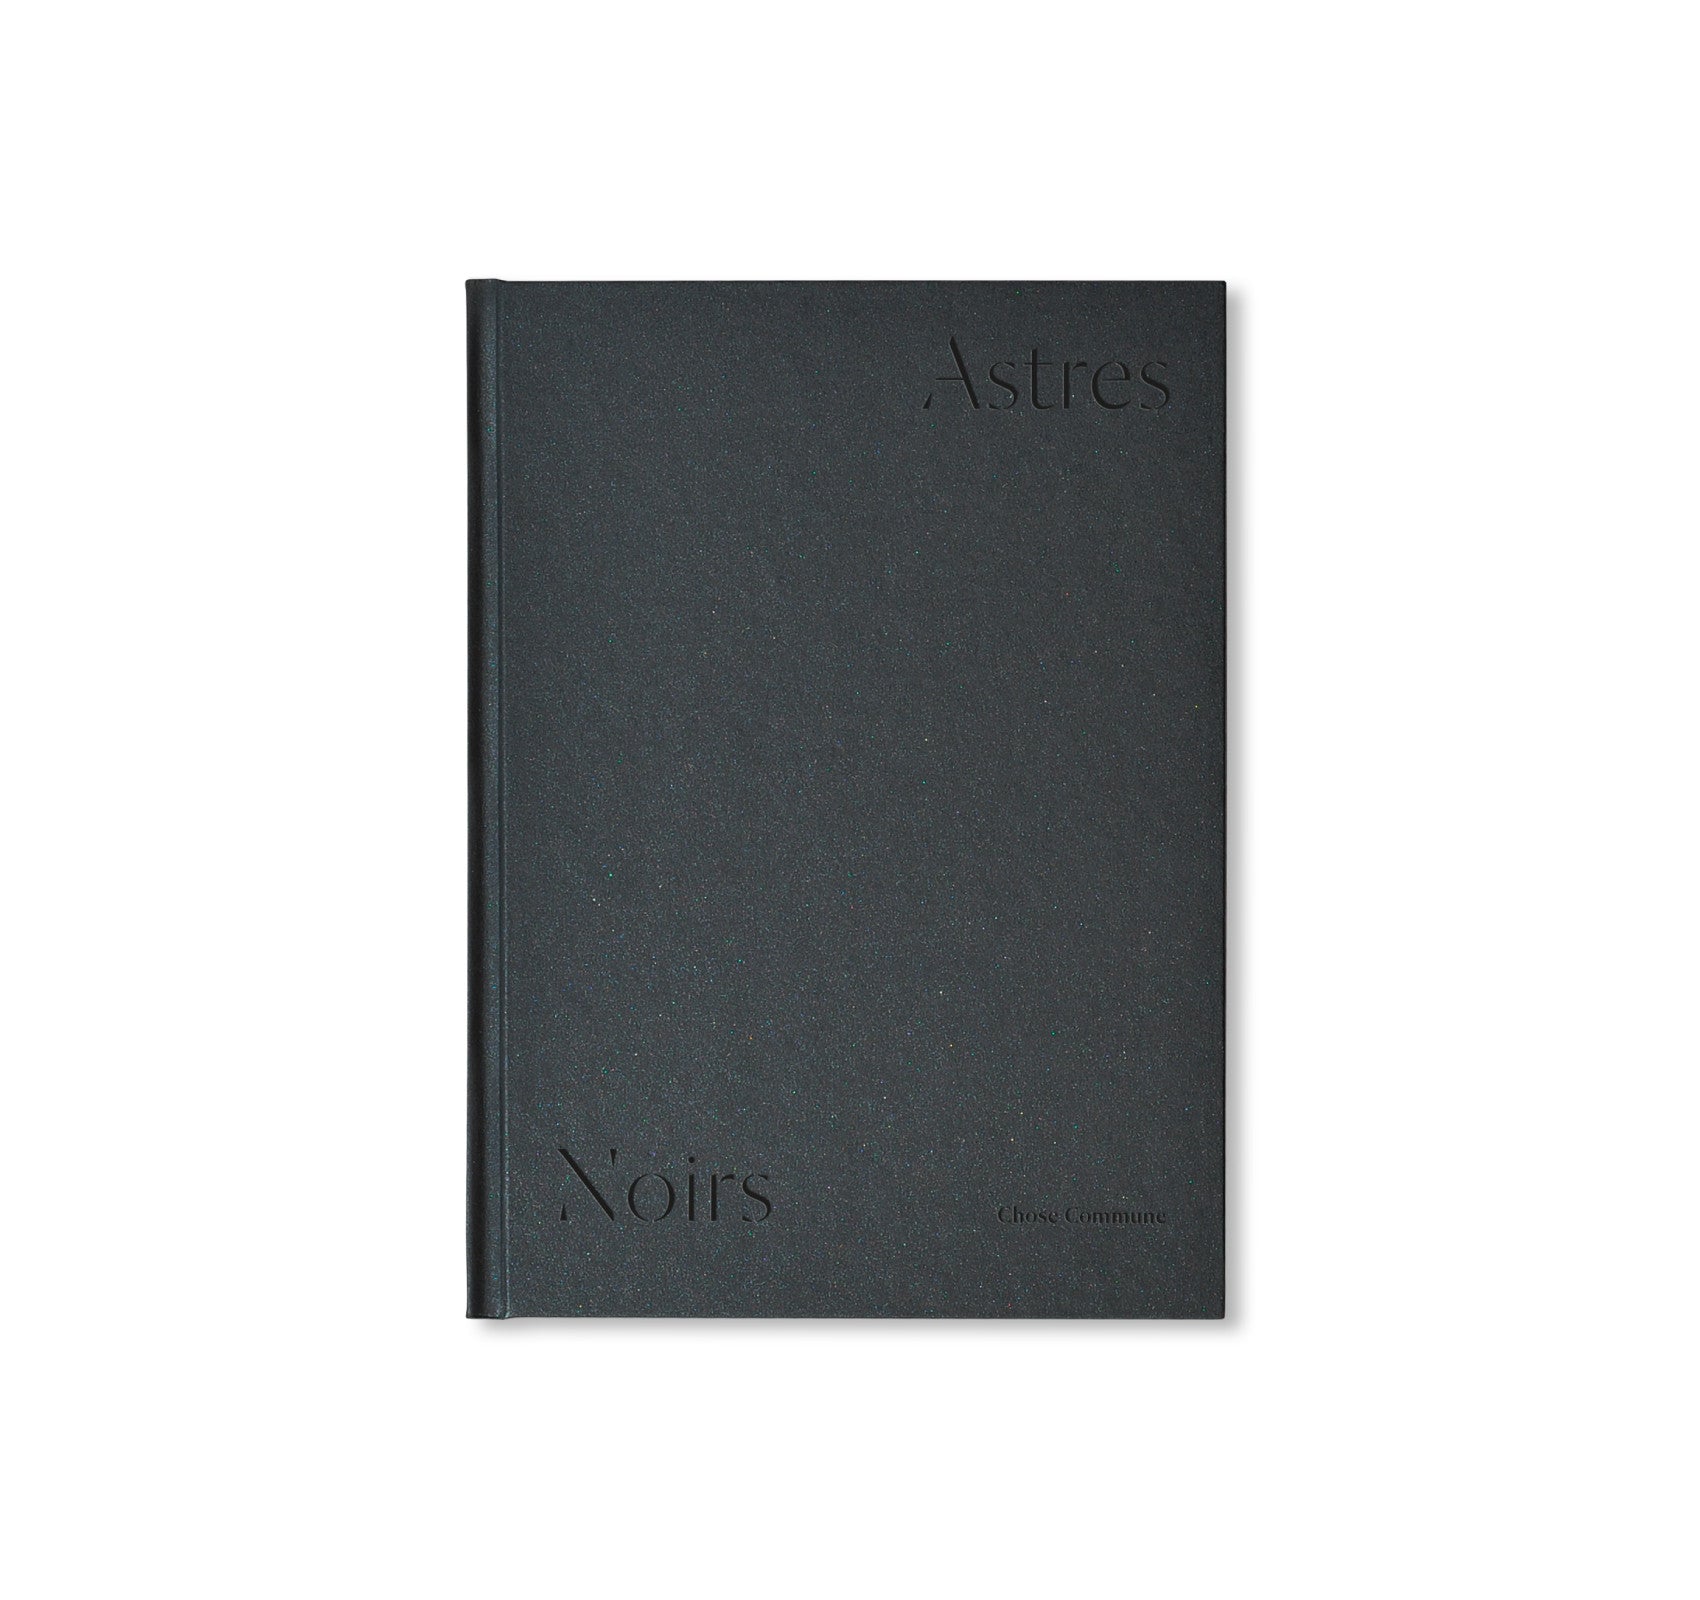 ASTRES NOIRS by Katrin Koenning & Sarker Protick [SECOND EDITION]